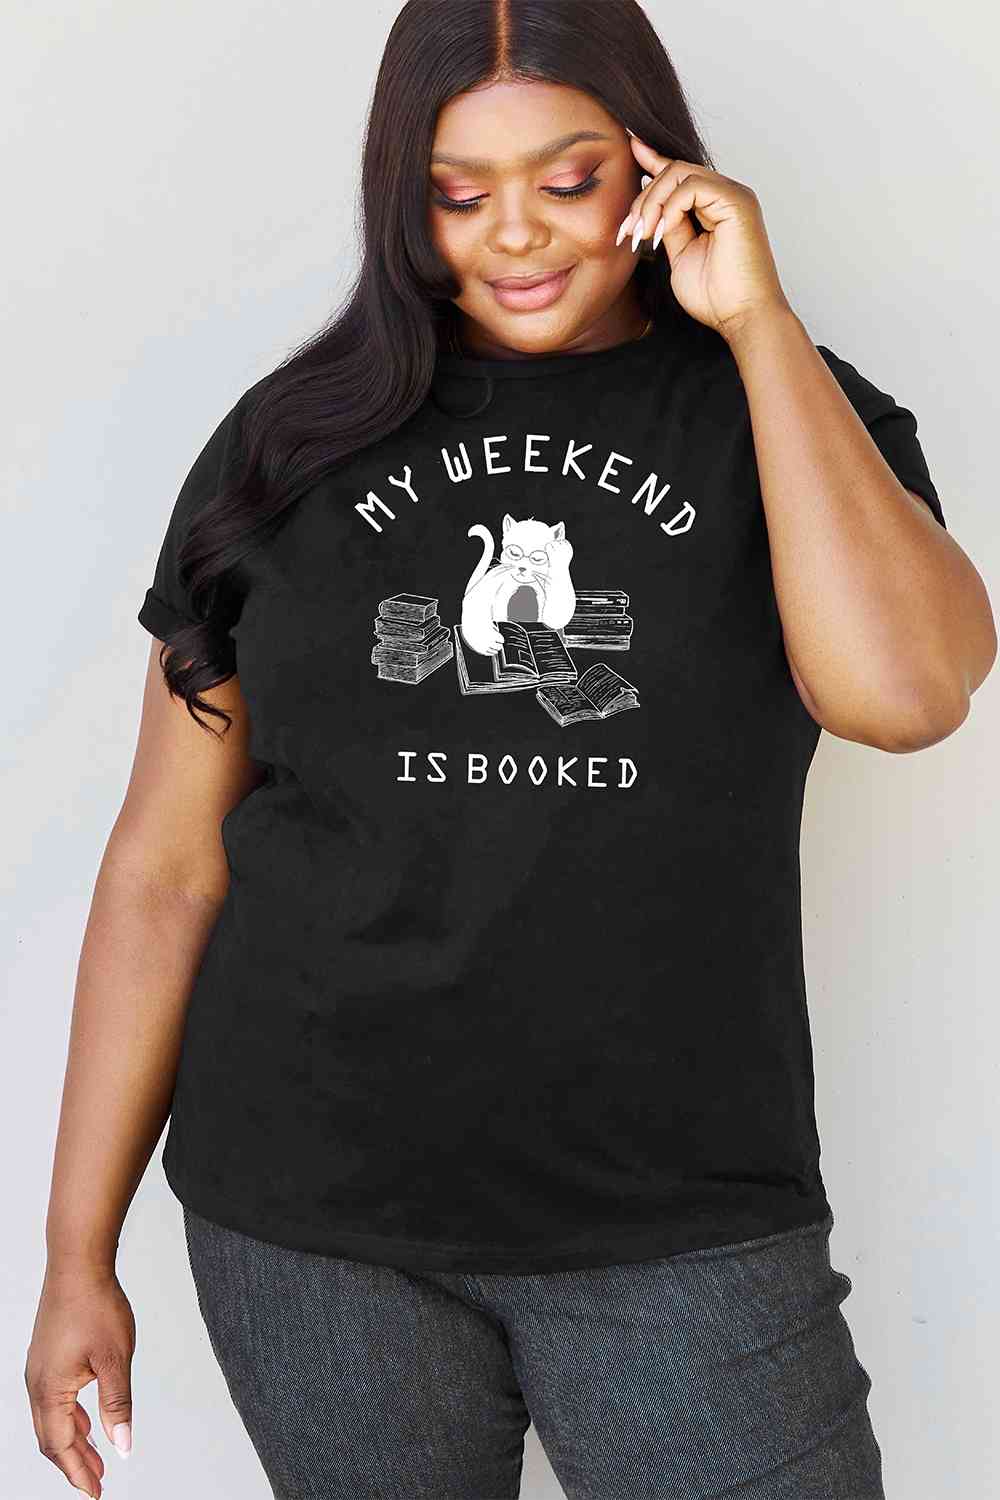 Simply Love Full Size MY WEEKEND IS BOOKED Graphic T-Shirt